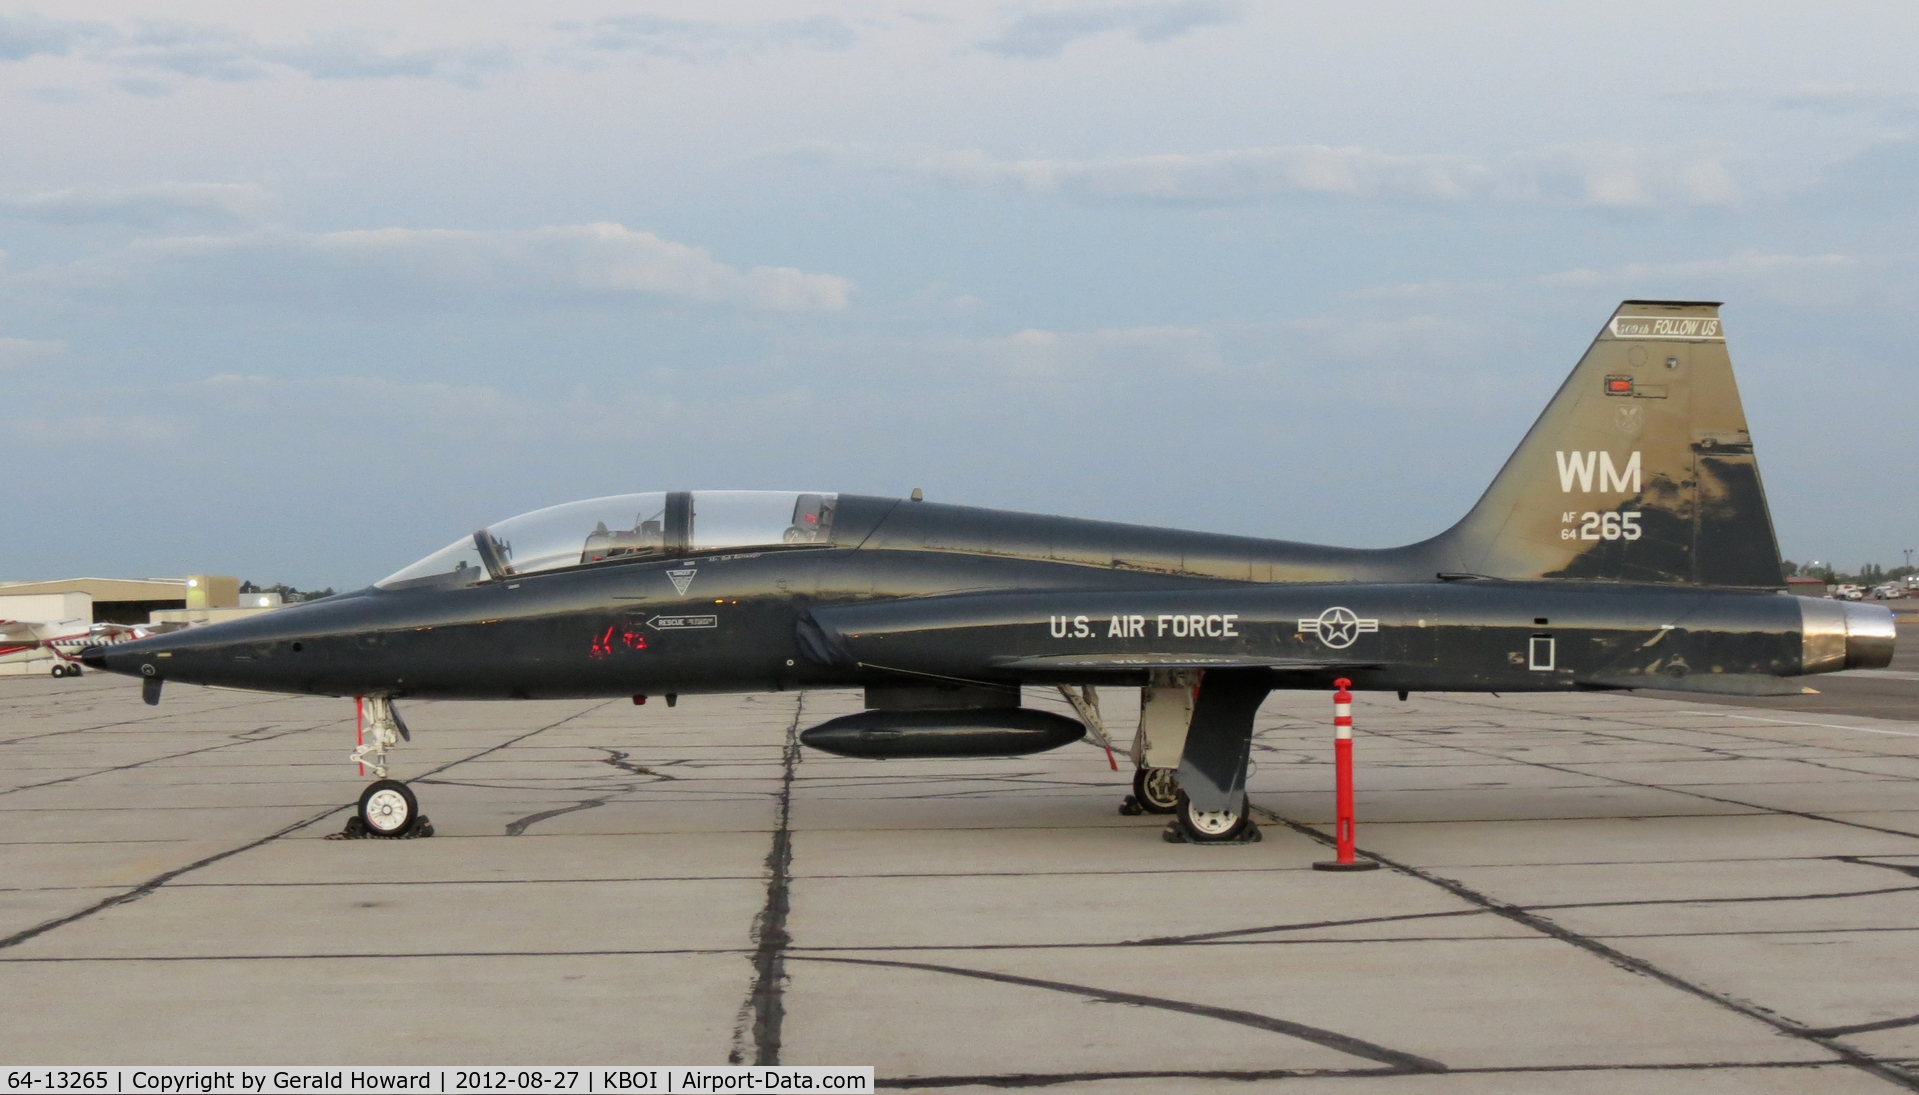 64-13265, 1964 Northrop T-38A Talon C/N N.5694, Parked on Western Ramp. T-38A of the 509th BW, Whiteman AFB, CA